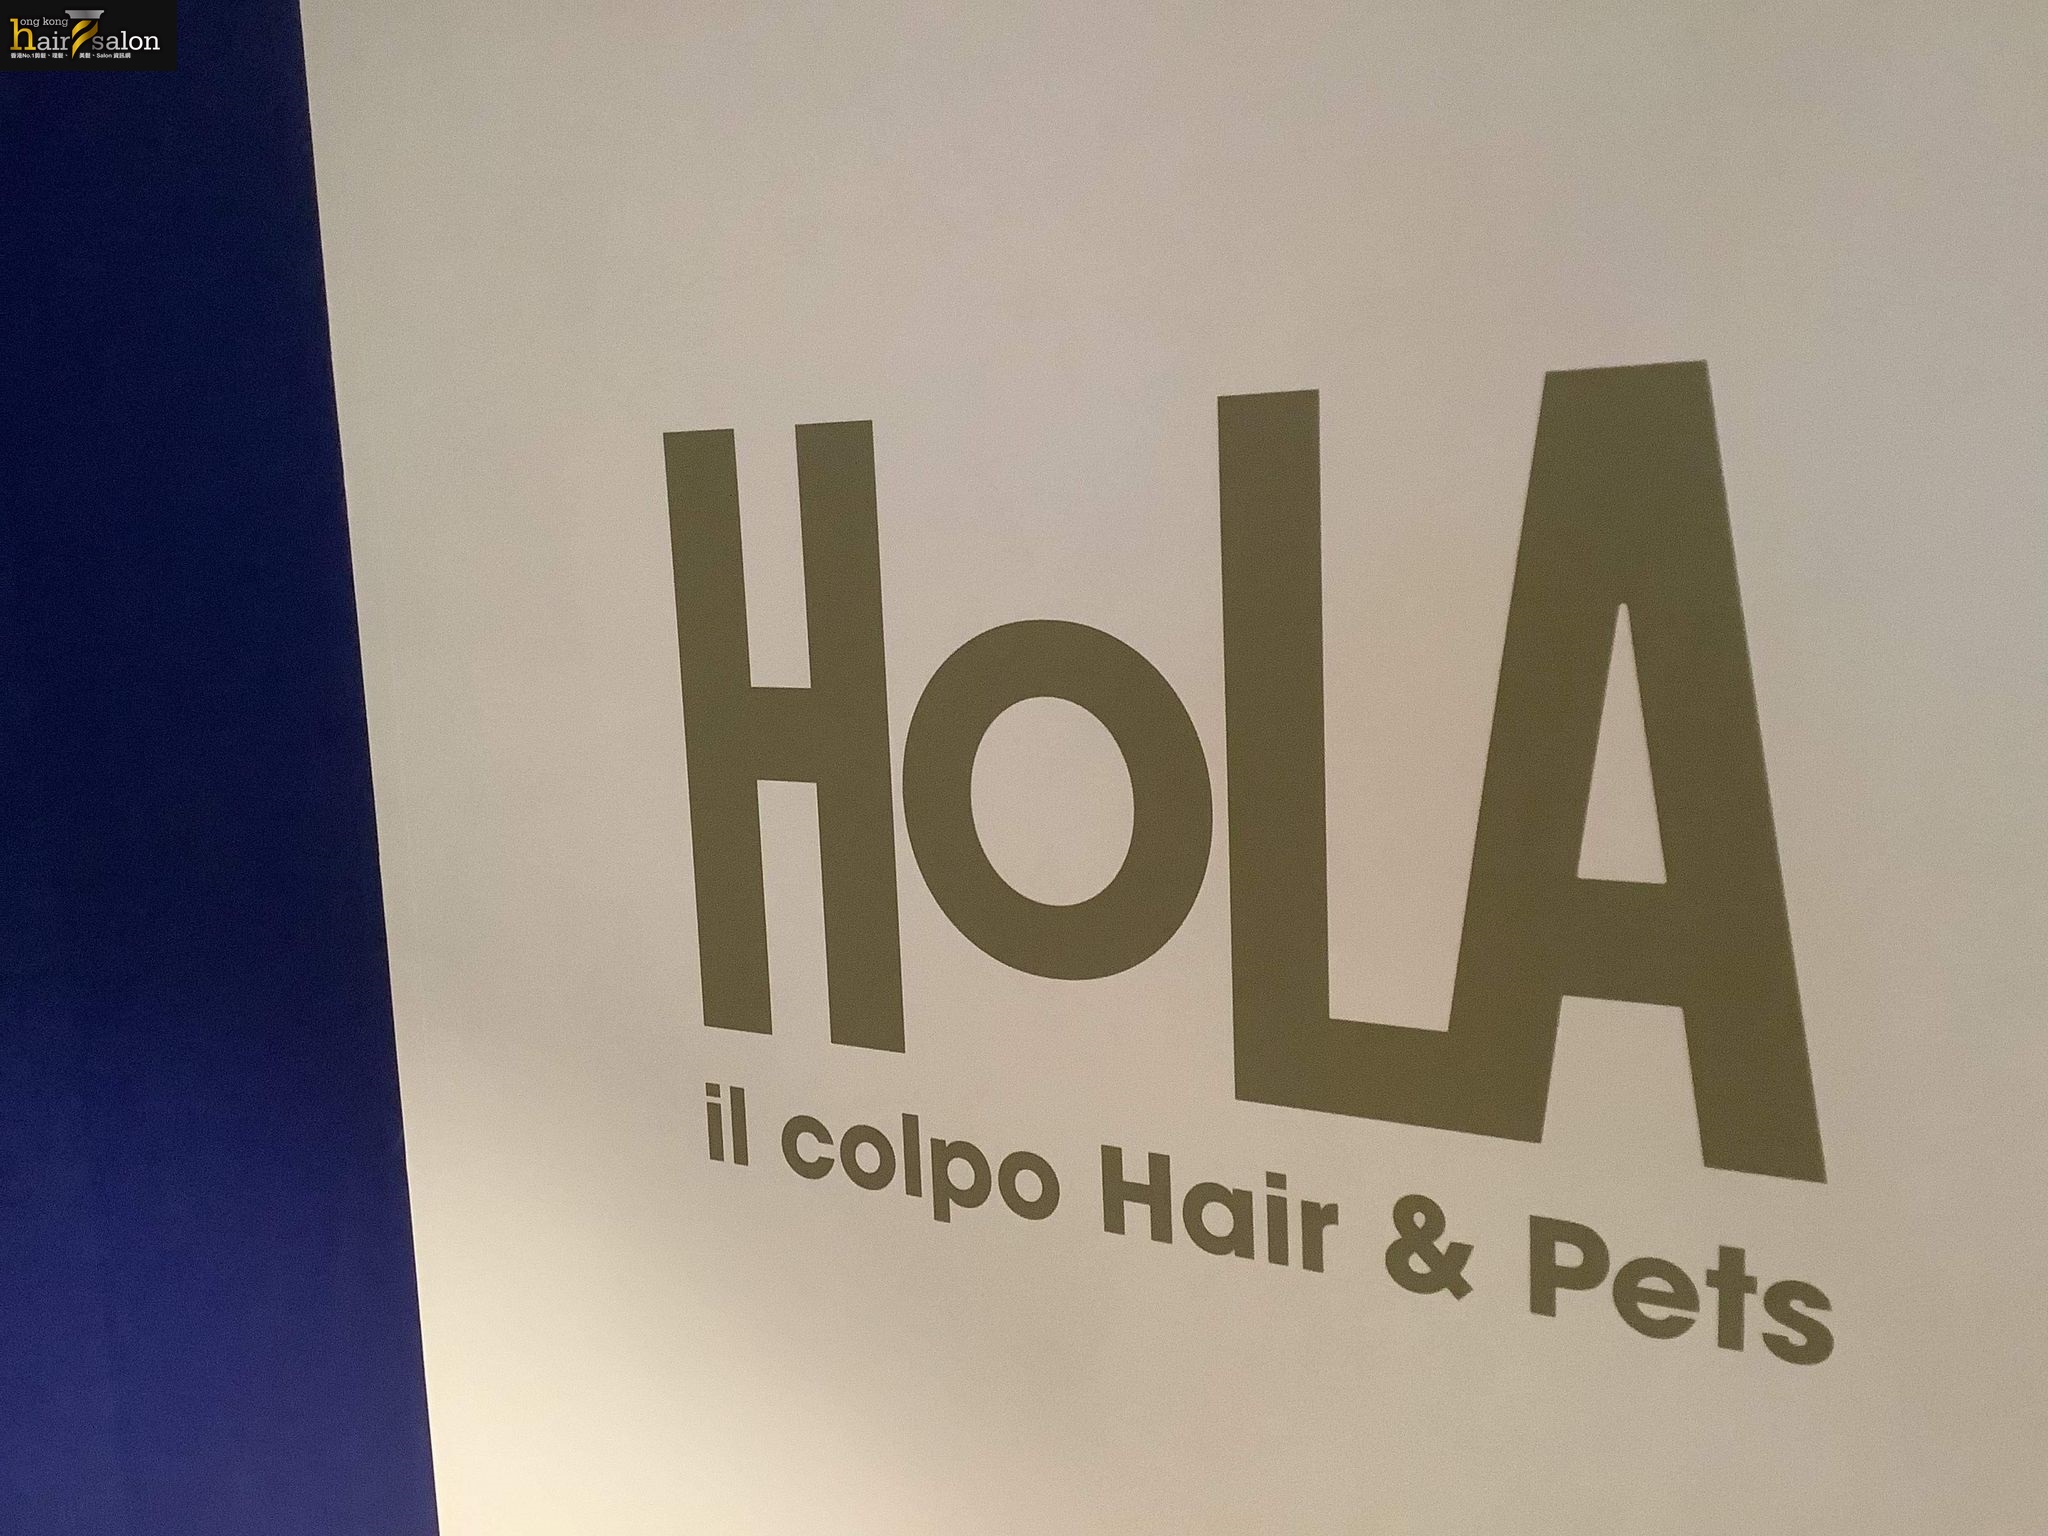 : Hola il Colpo hairs & pets